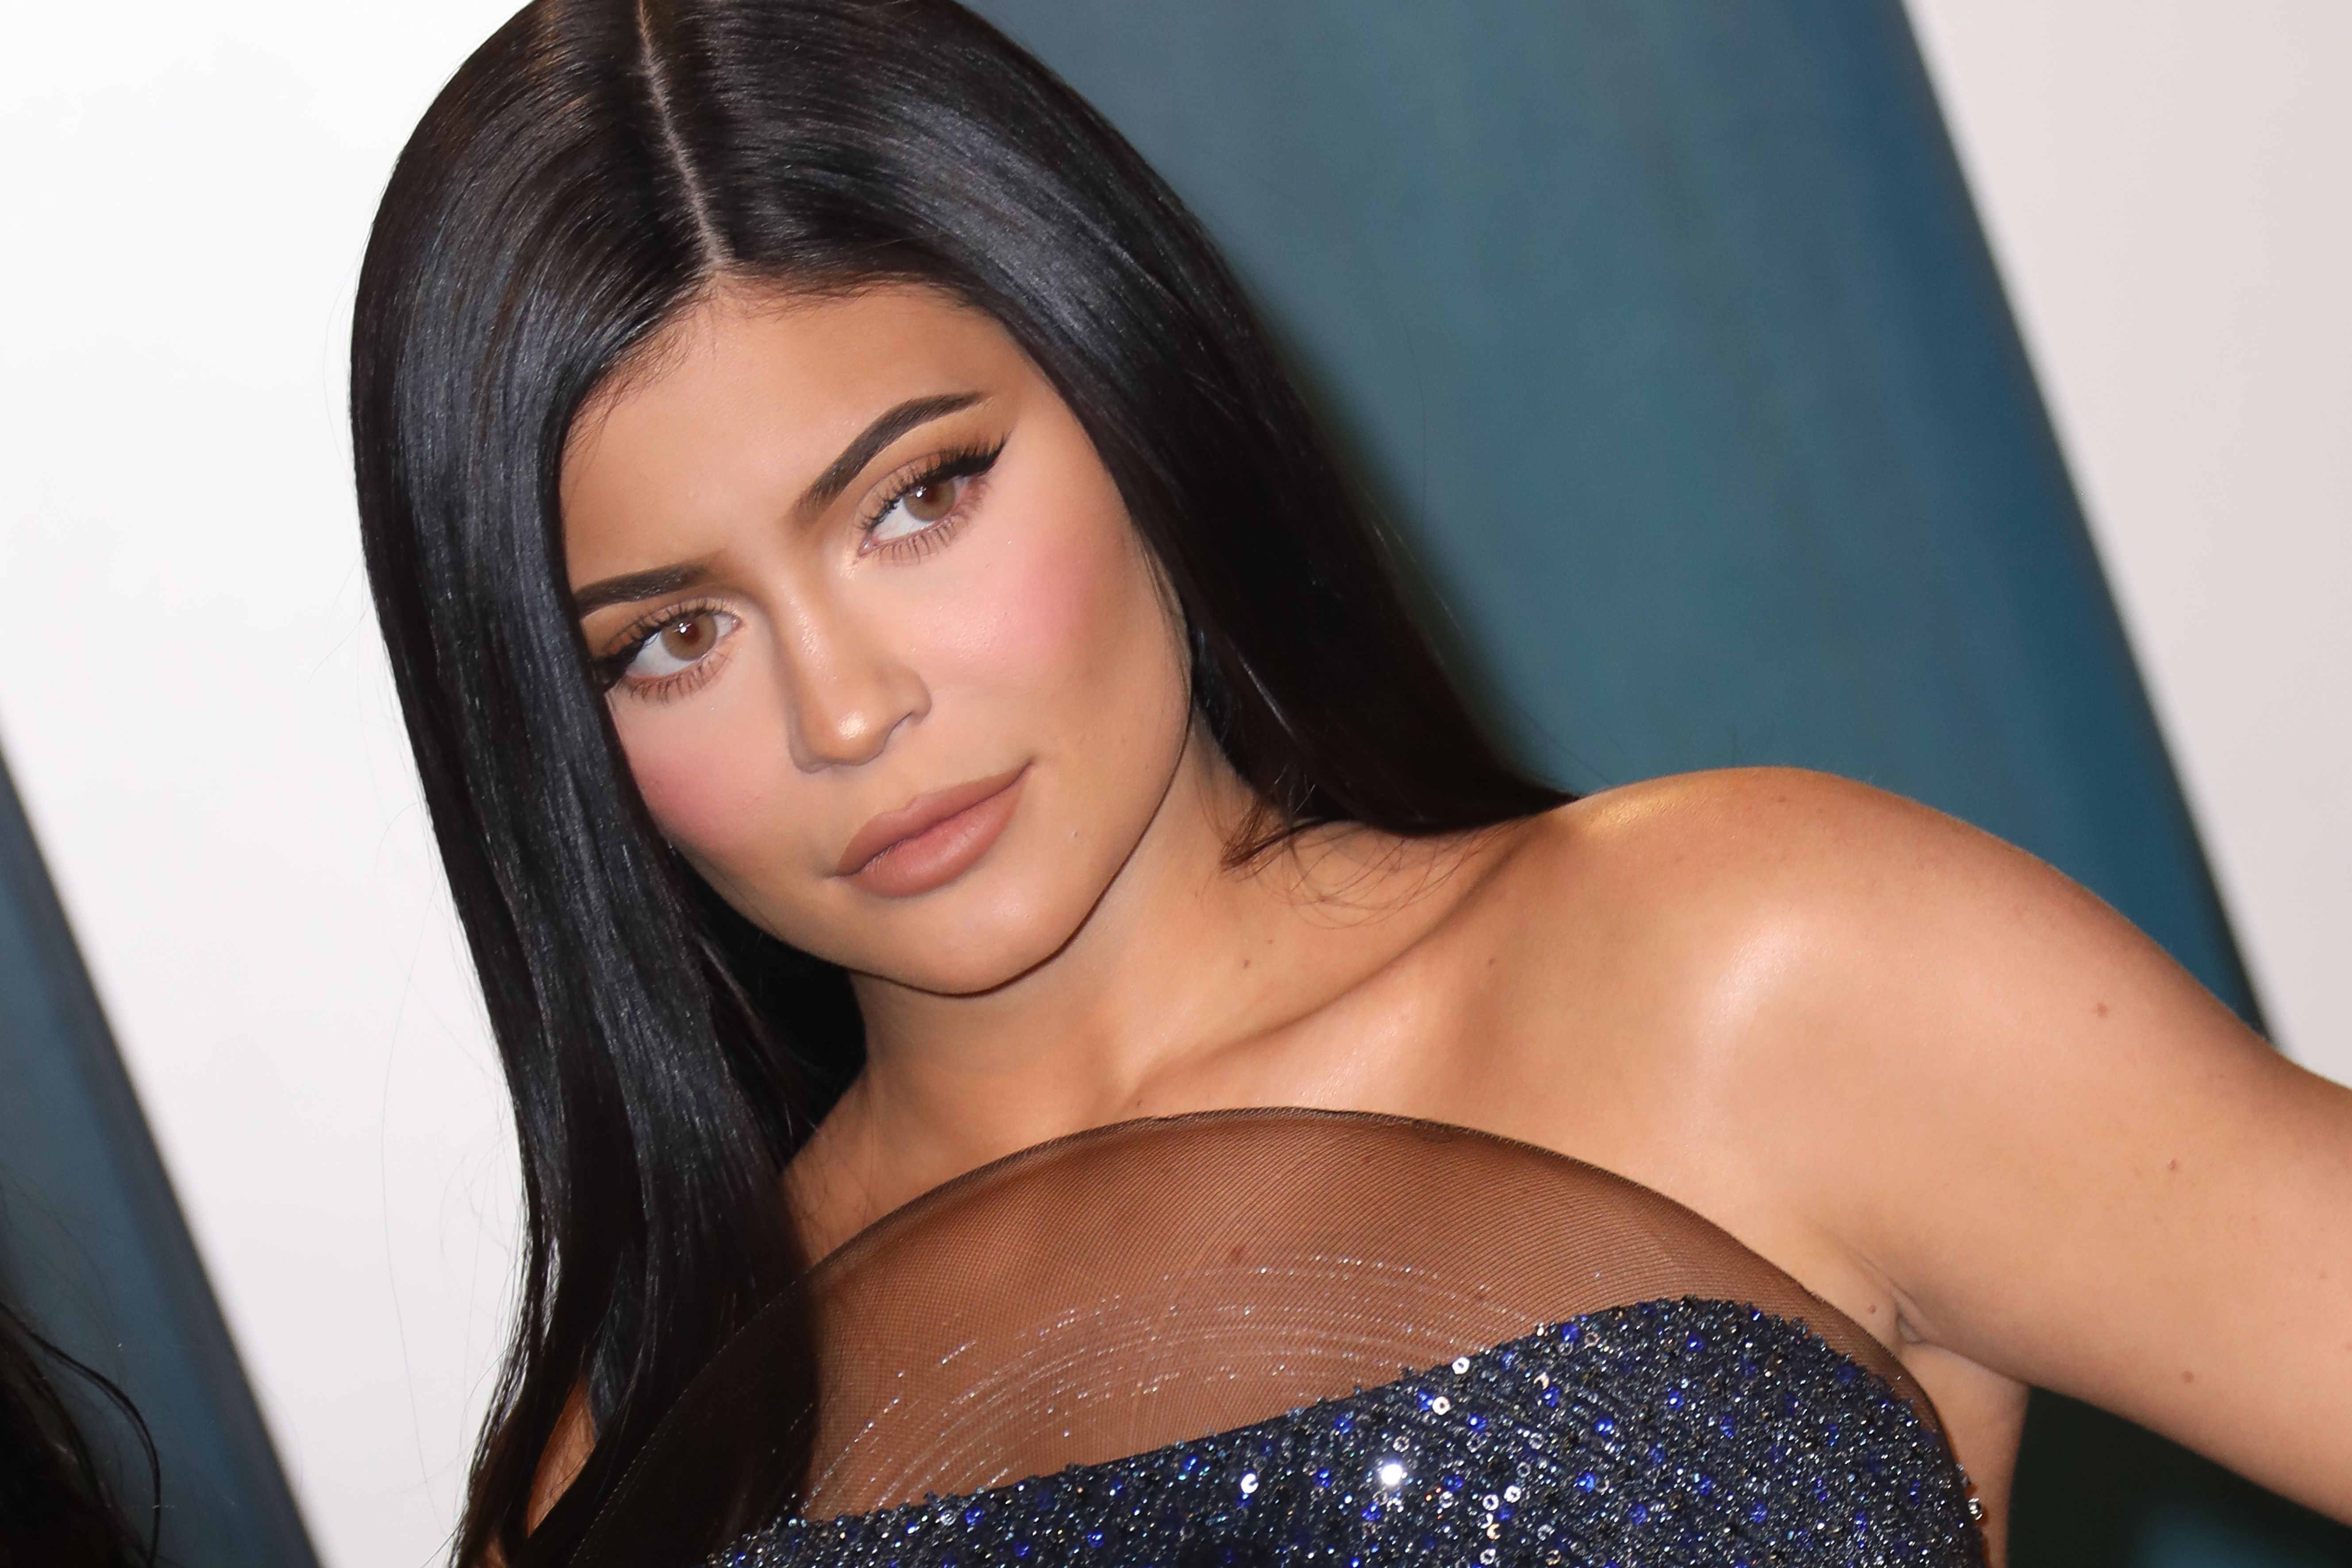 10 of Kylie Jenner's blonde and brunette looks